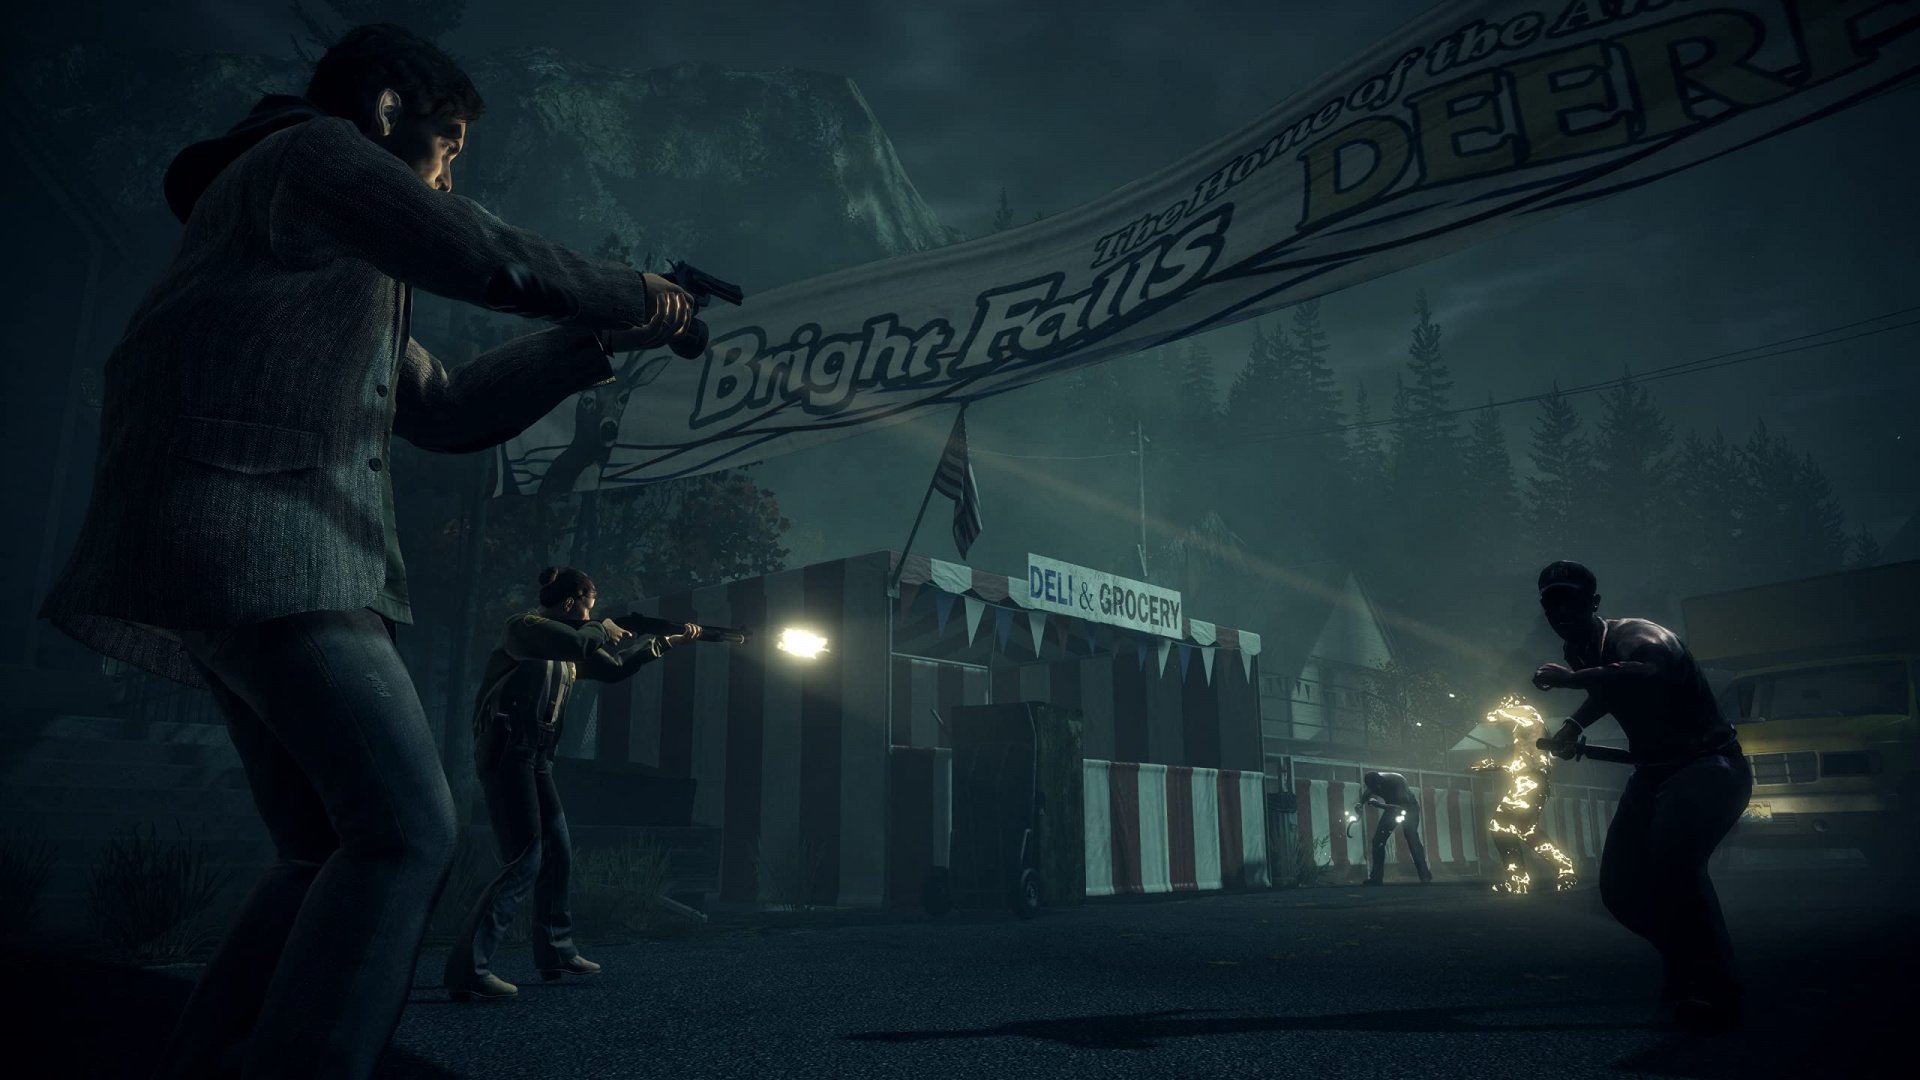 Alan Wake 2 PS5 vs Xbox Series XS and PC Comparison Highlights Impressive  Results on Xbox Series S